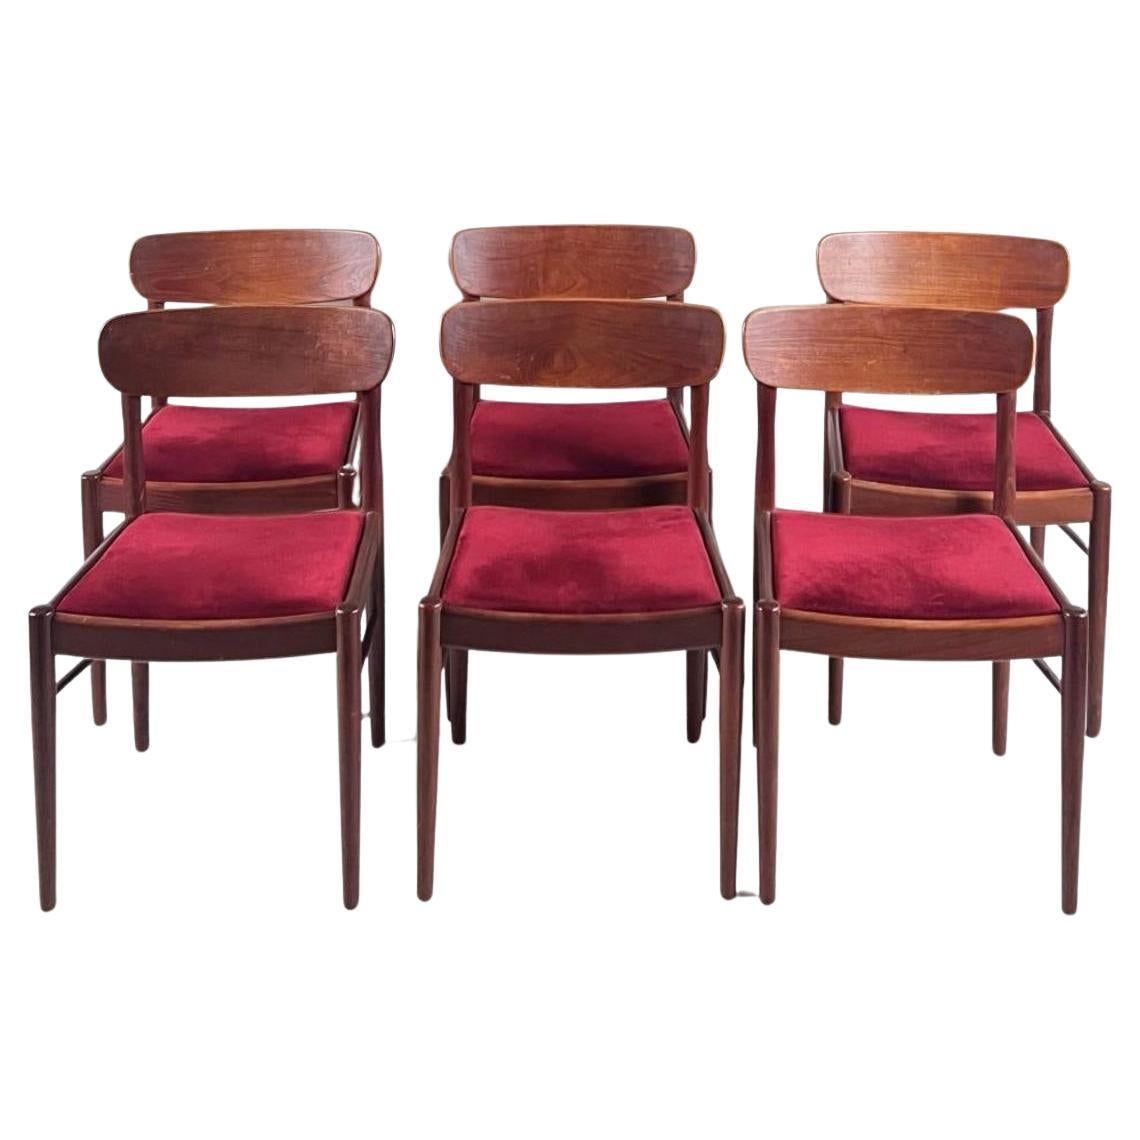 Beautiful Vintage Set of 6 Danish modern teak dining chairs with upholstery 